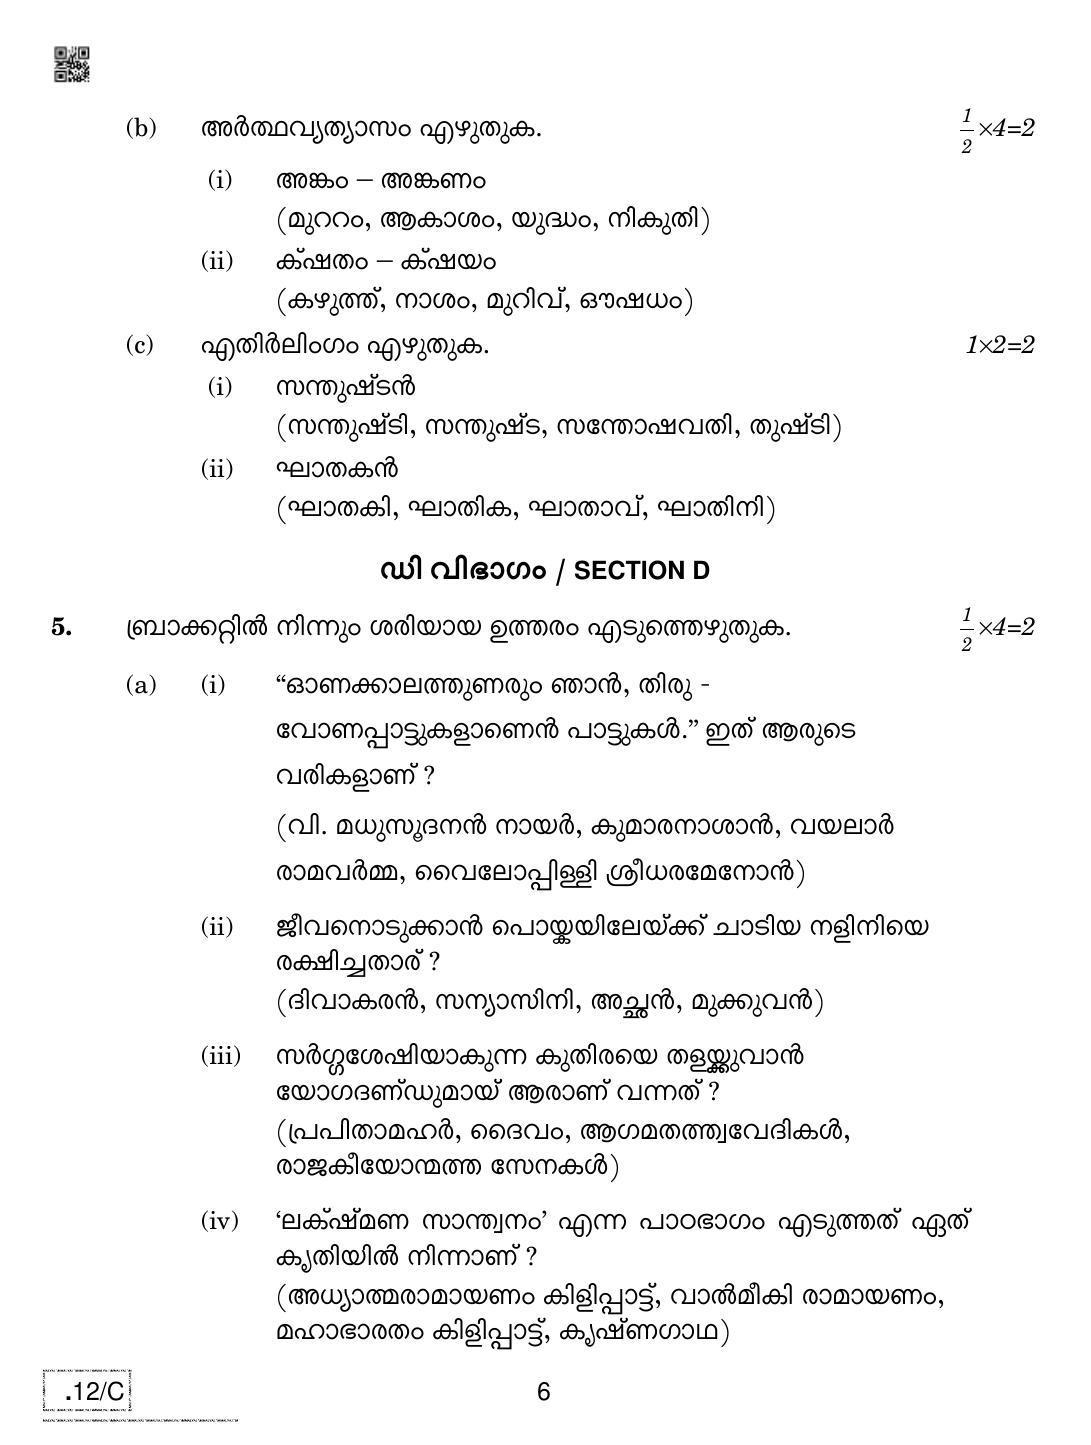 CBSE Class 10 Malayalam 2020 Compartment Question Paper - Page 6